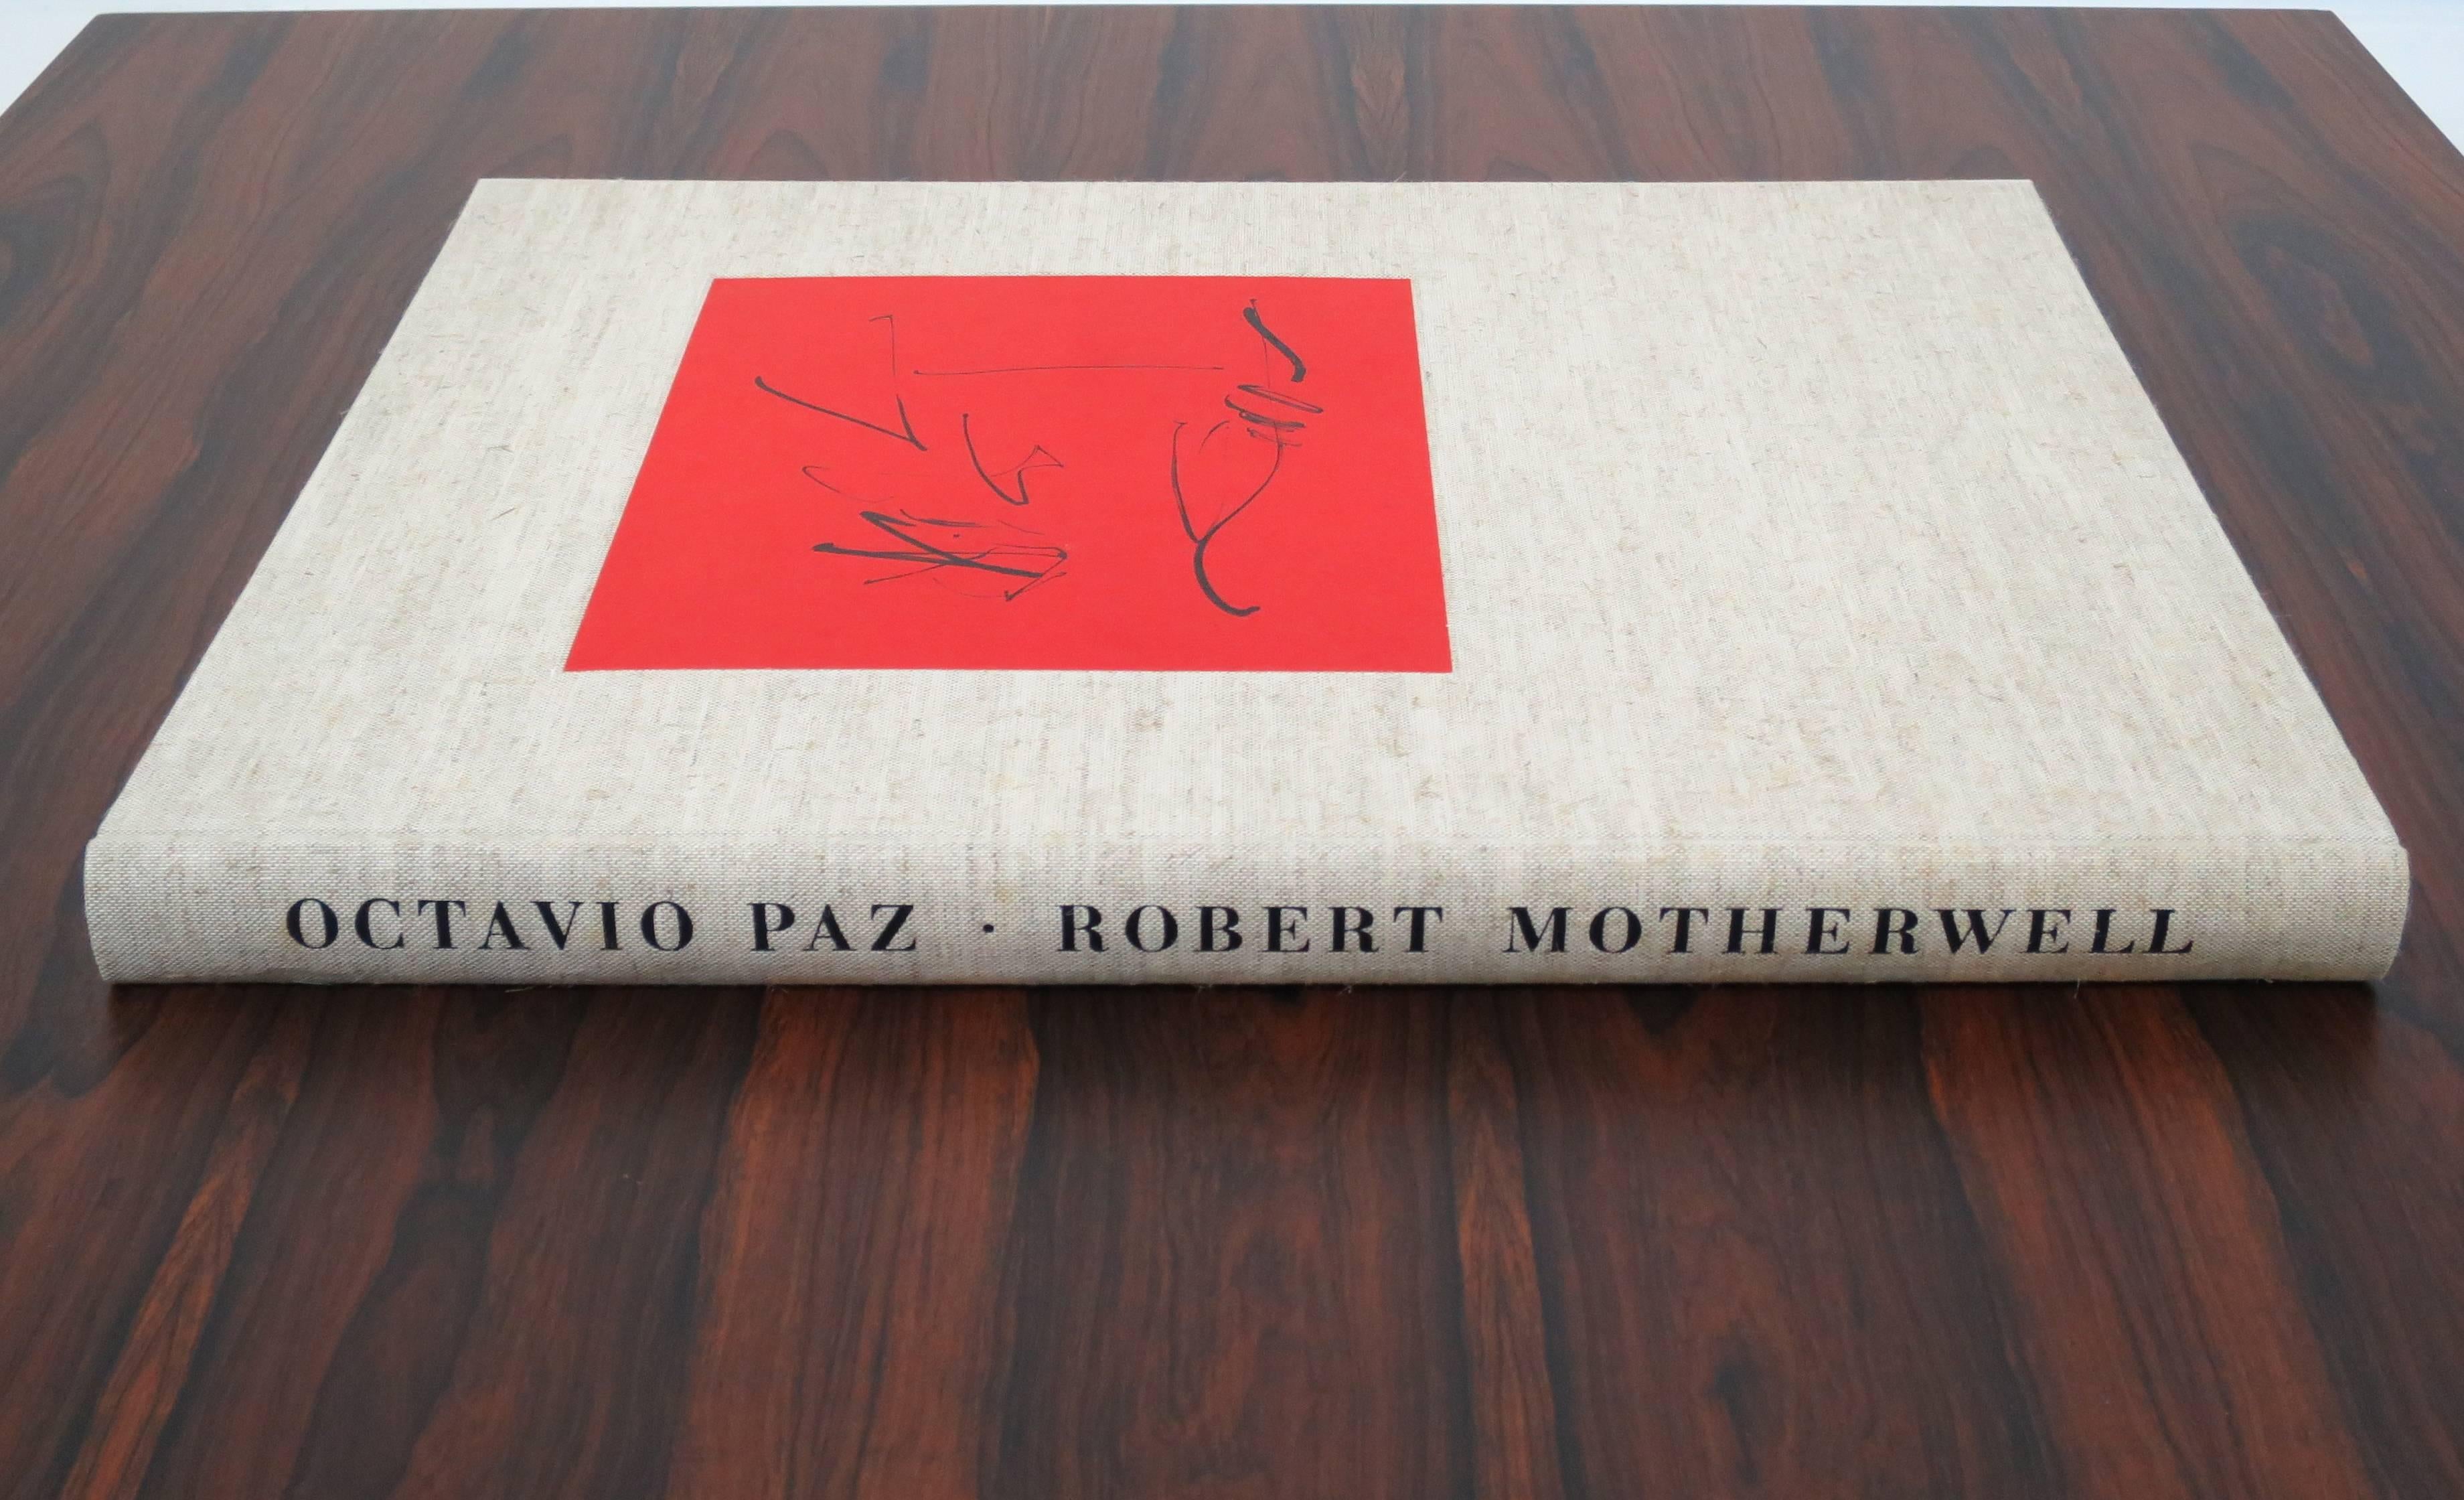 Large format portfolio with 27 lithographs by Robert Motherwell. Poetry in English and Spanish by Octavio Paz. Pencil Signed by both artists, 421/750. Perfect coffee table book.